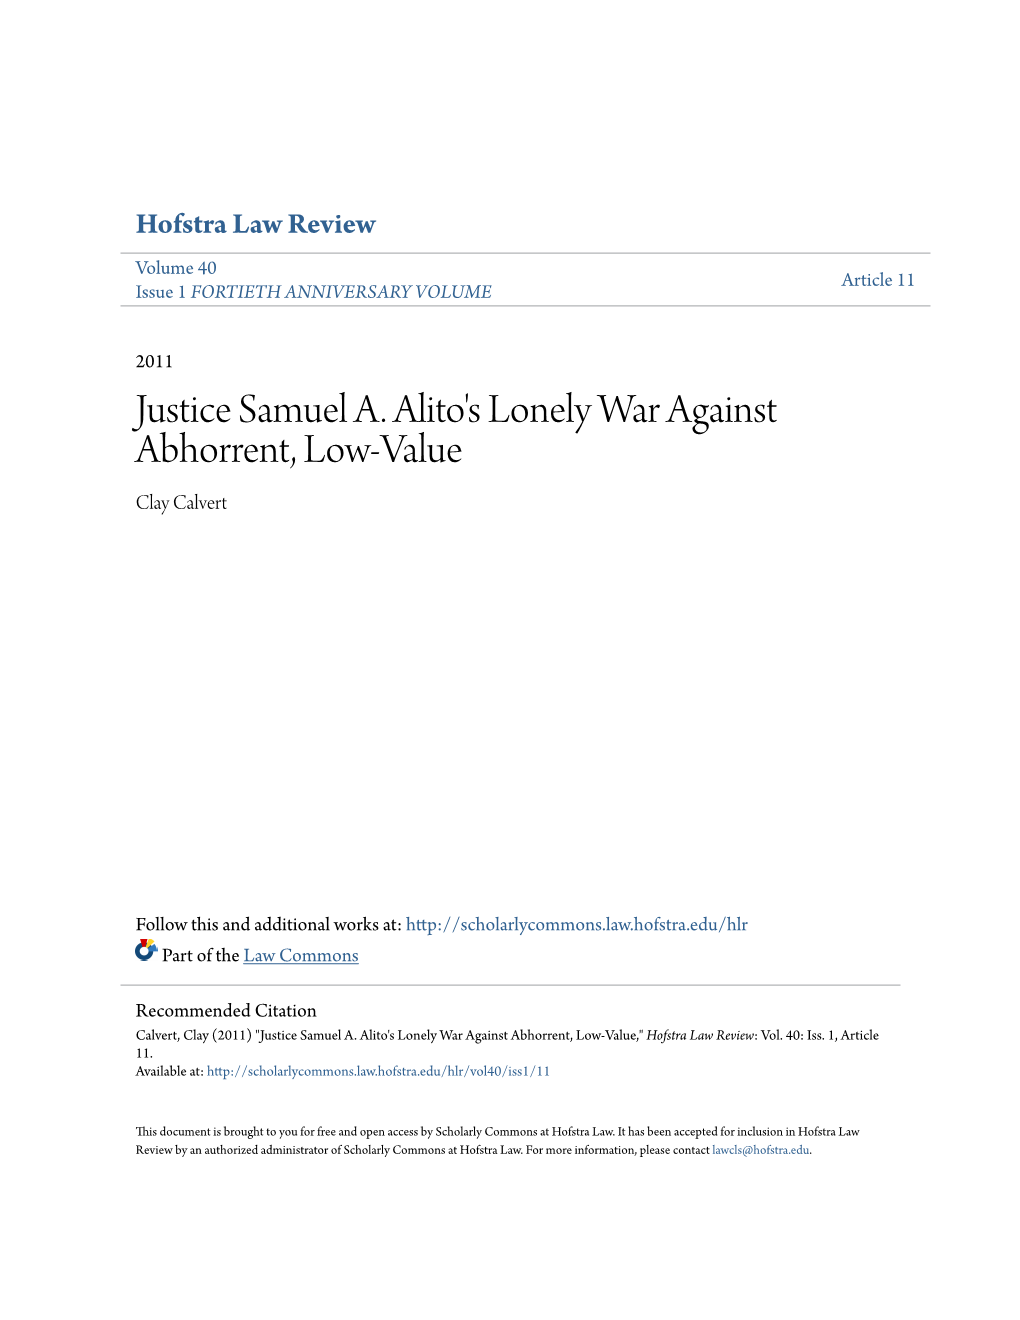 Justice Samuel A. Alito's Lonely War Against Abhorrent, Low-Value Clay Calvert